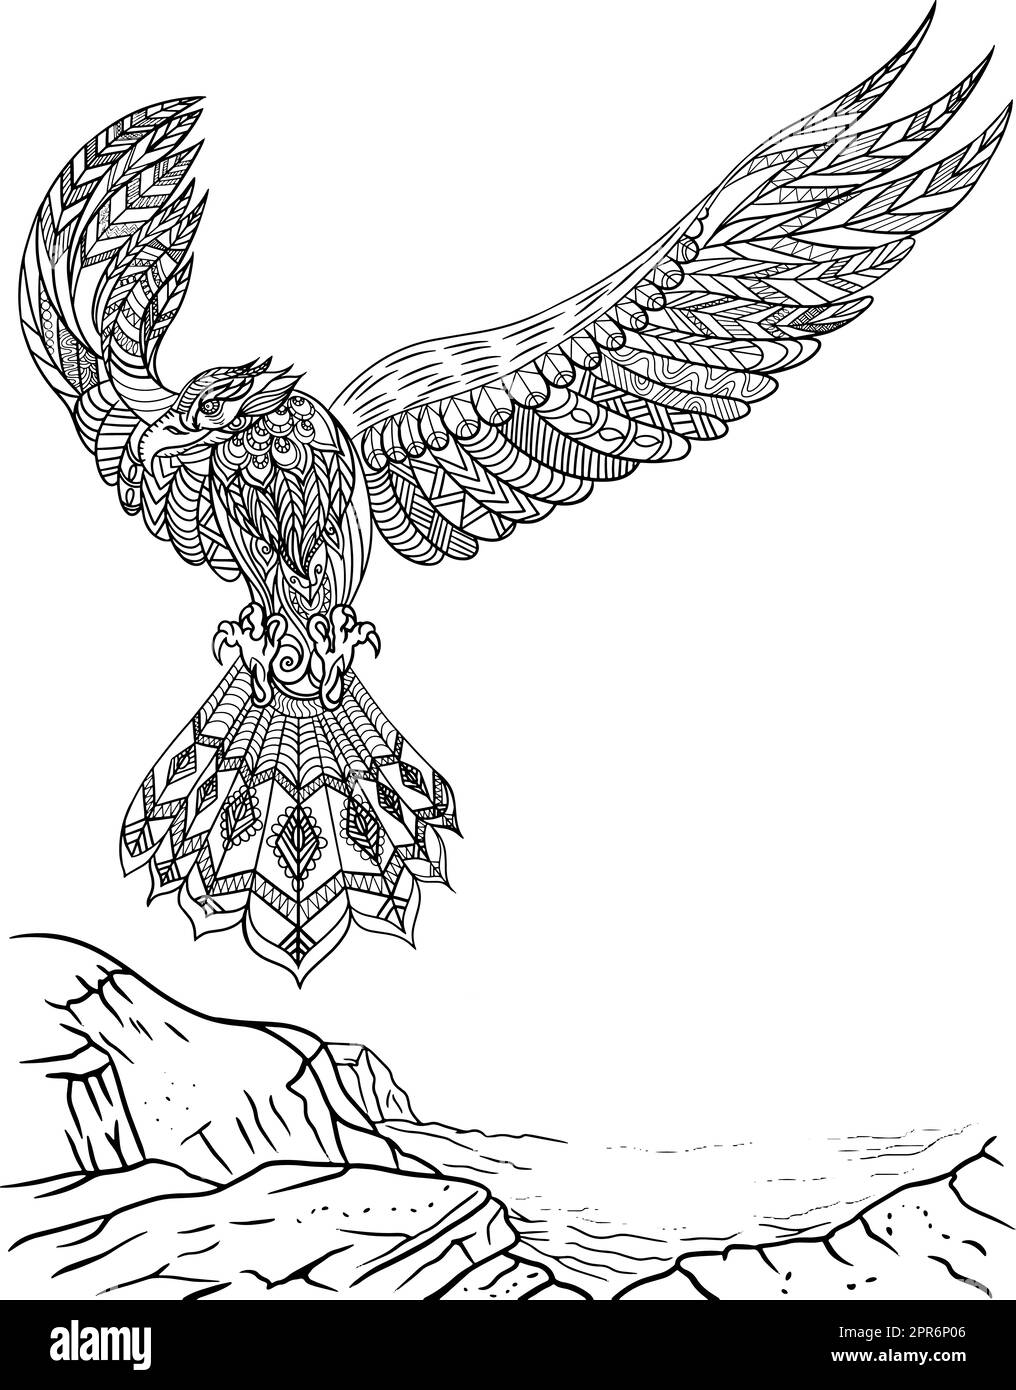 Falcon Facing Forward Spreading Wings Wide Open Flying Coloring Book Page. Stock Photo